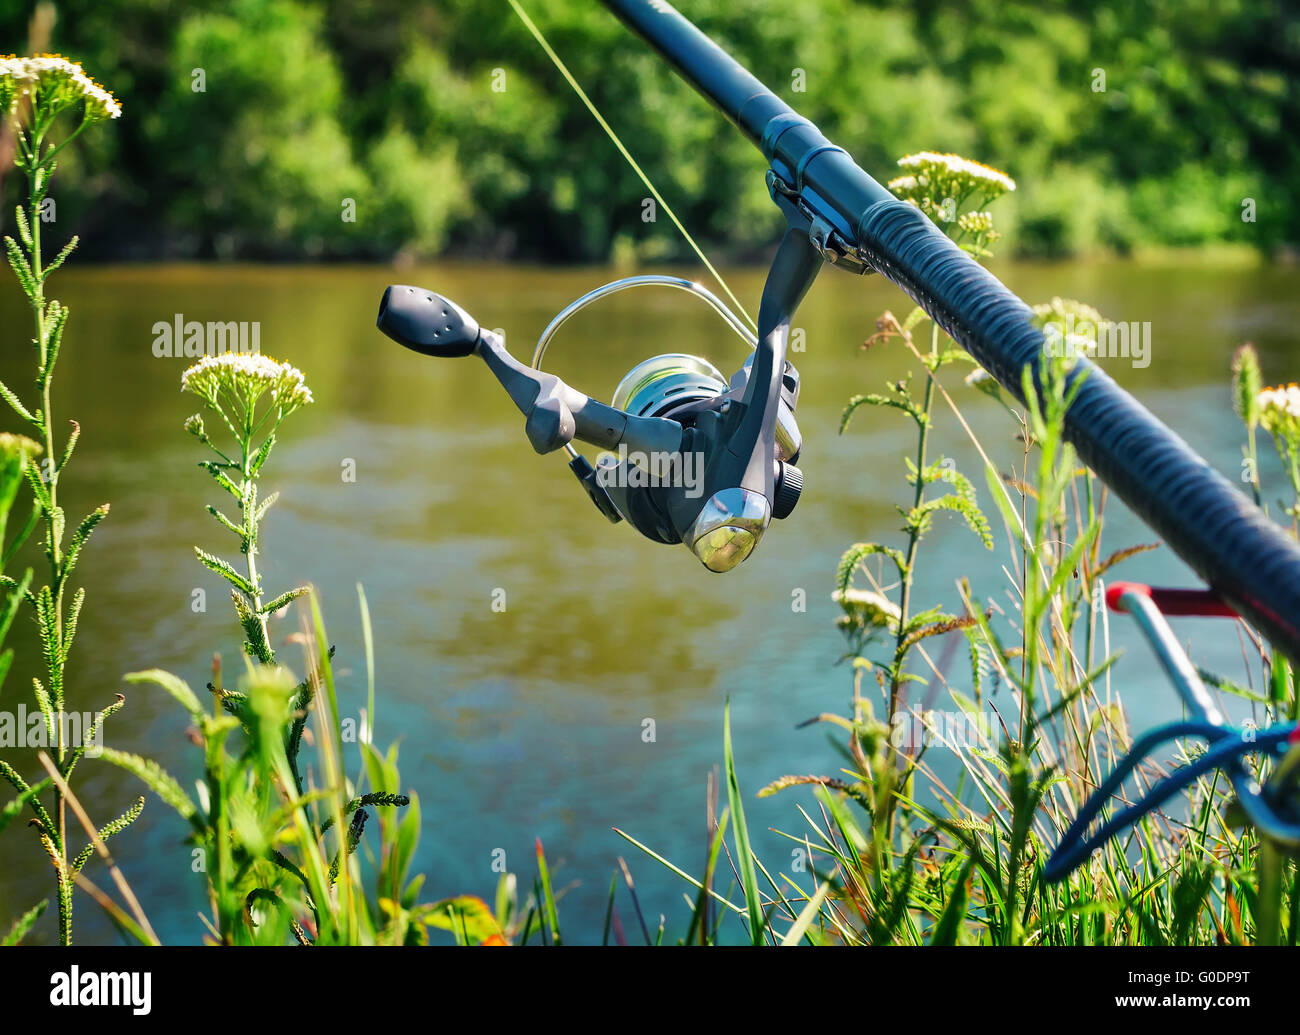 Feeder - English fishing tackle for catching fish Stock Photo - Alamy